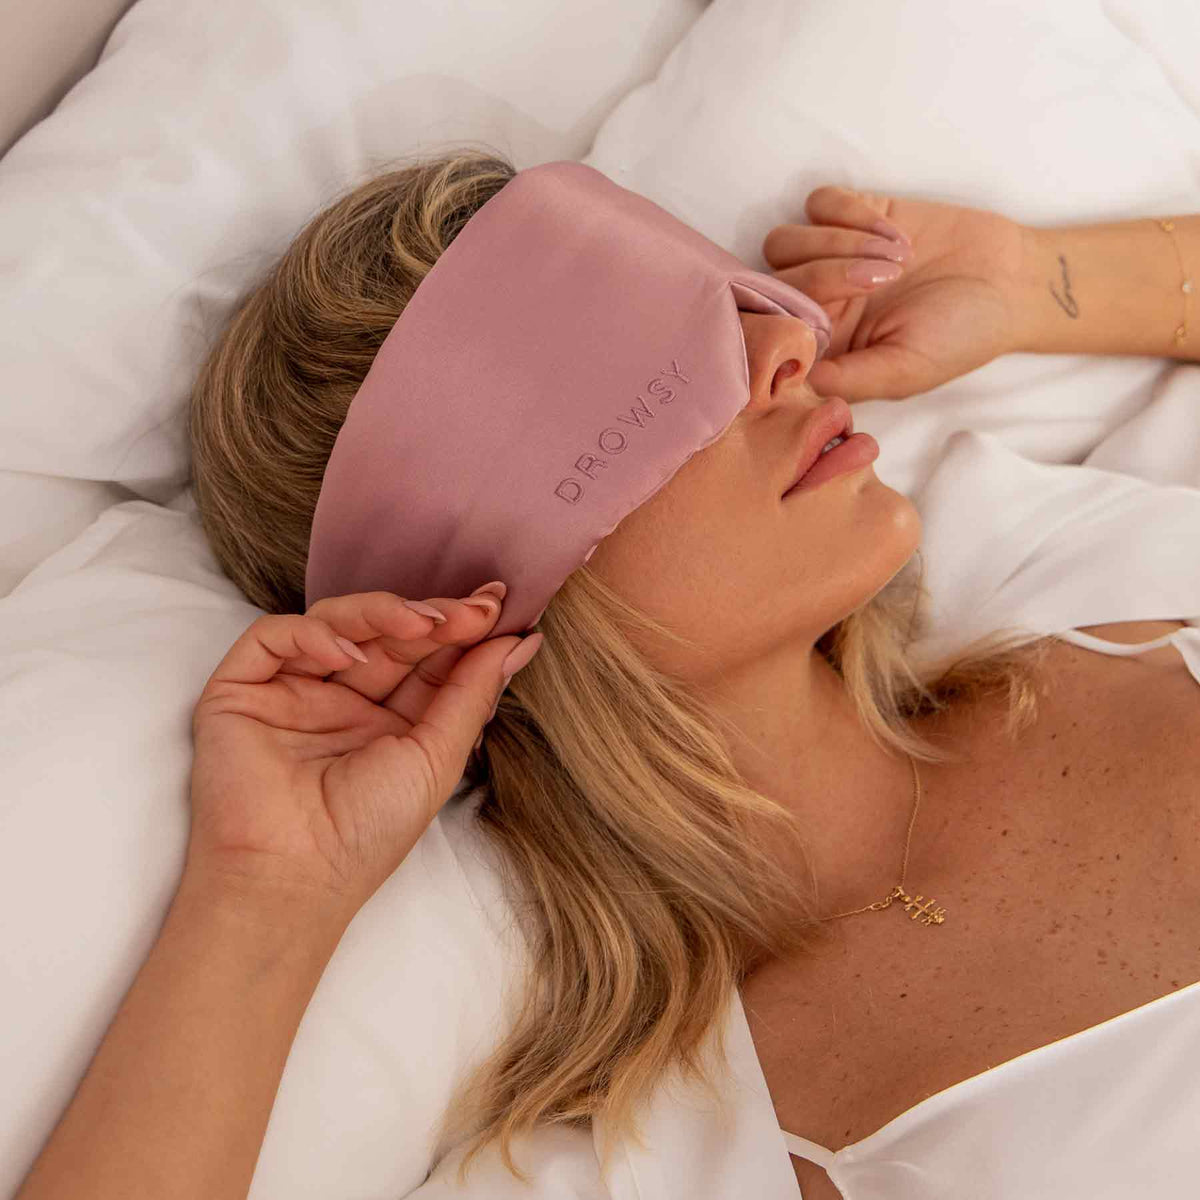 Sleeping model in bed with Drowsy silk sleep mask covering eyes